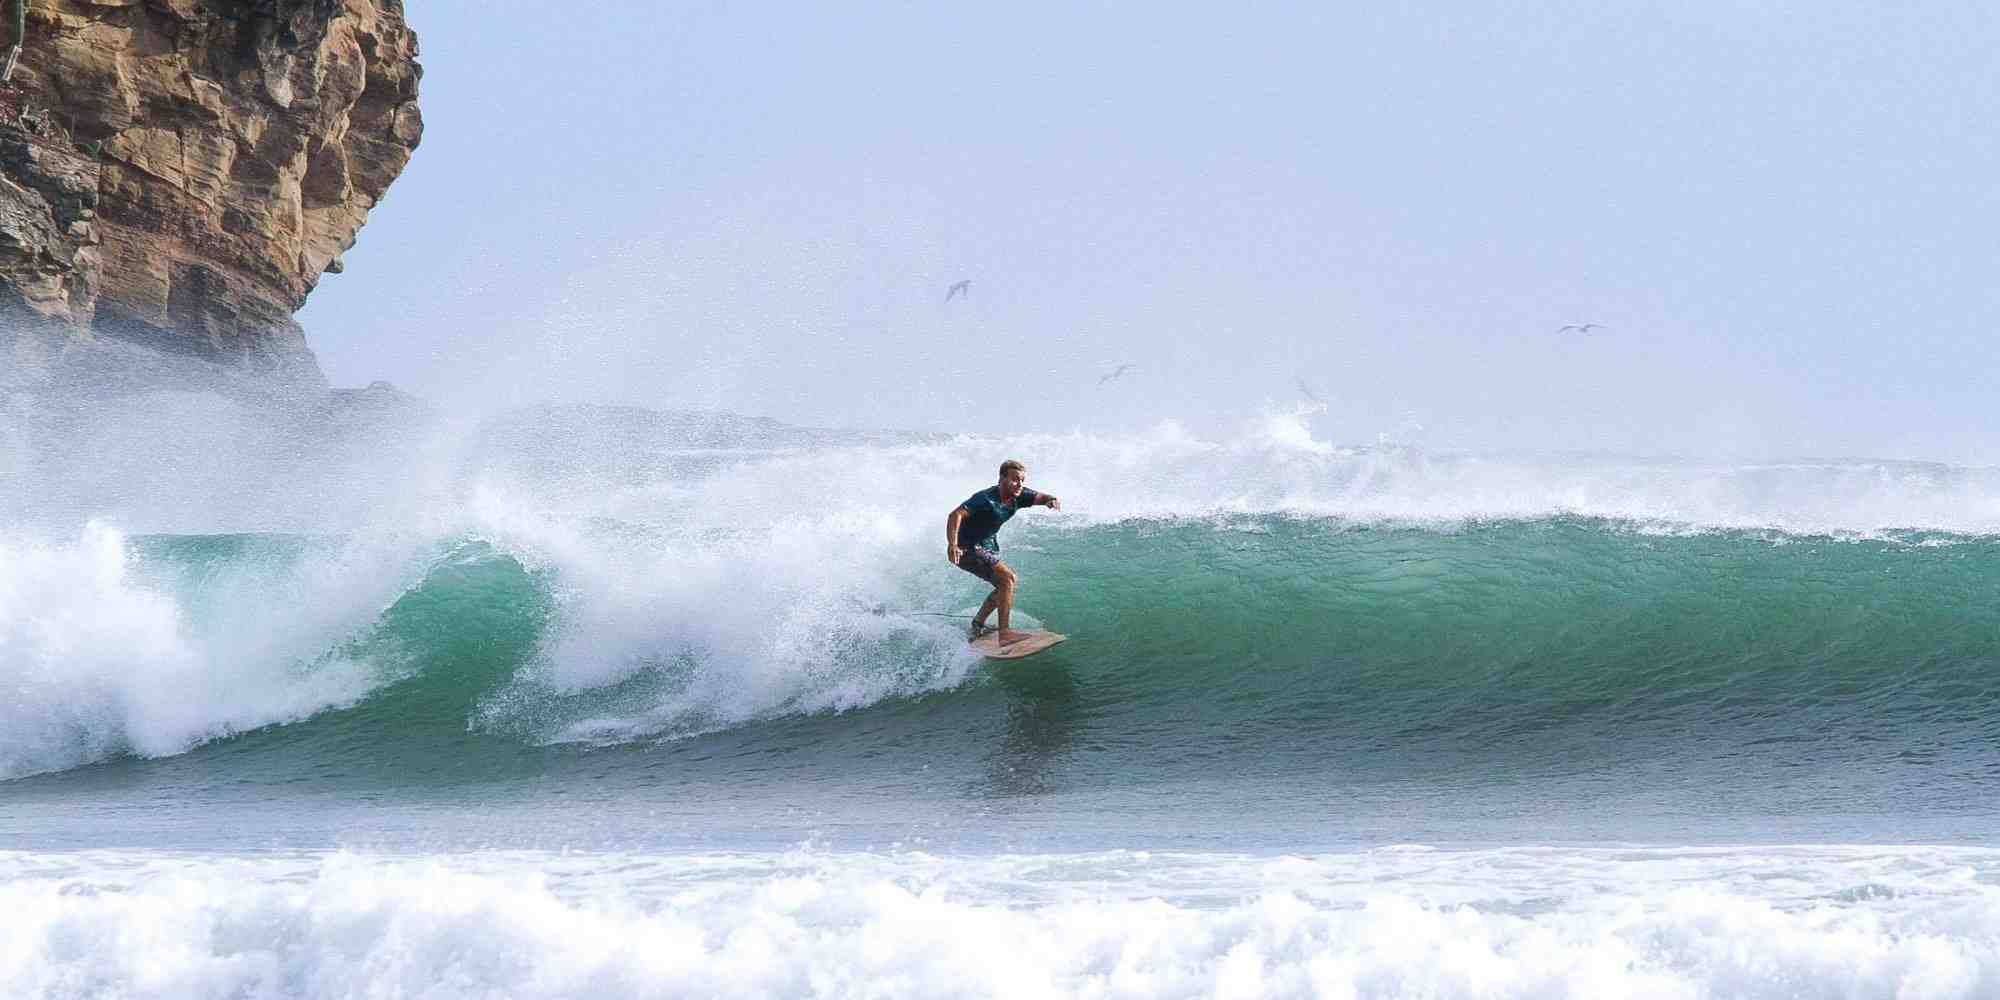 How do you build strength in surfing?